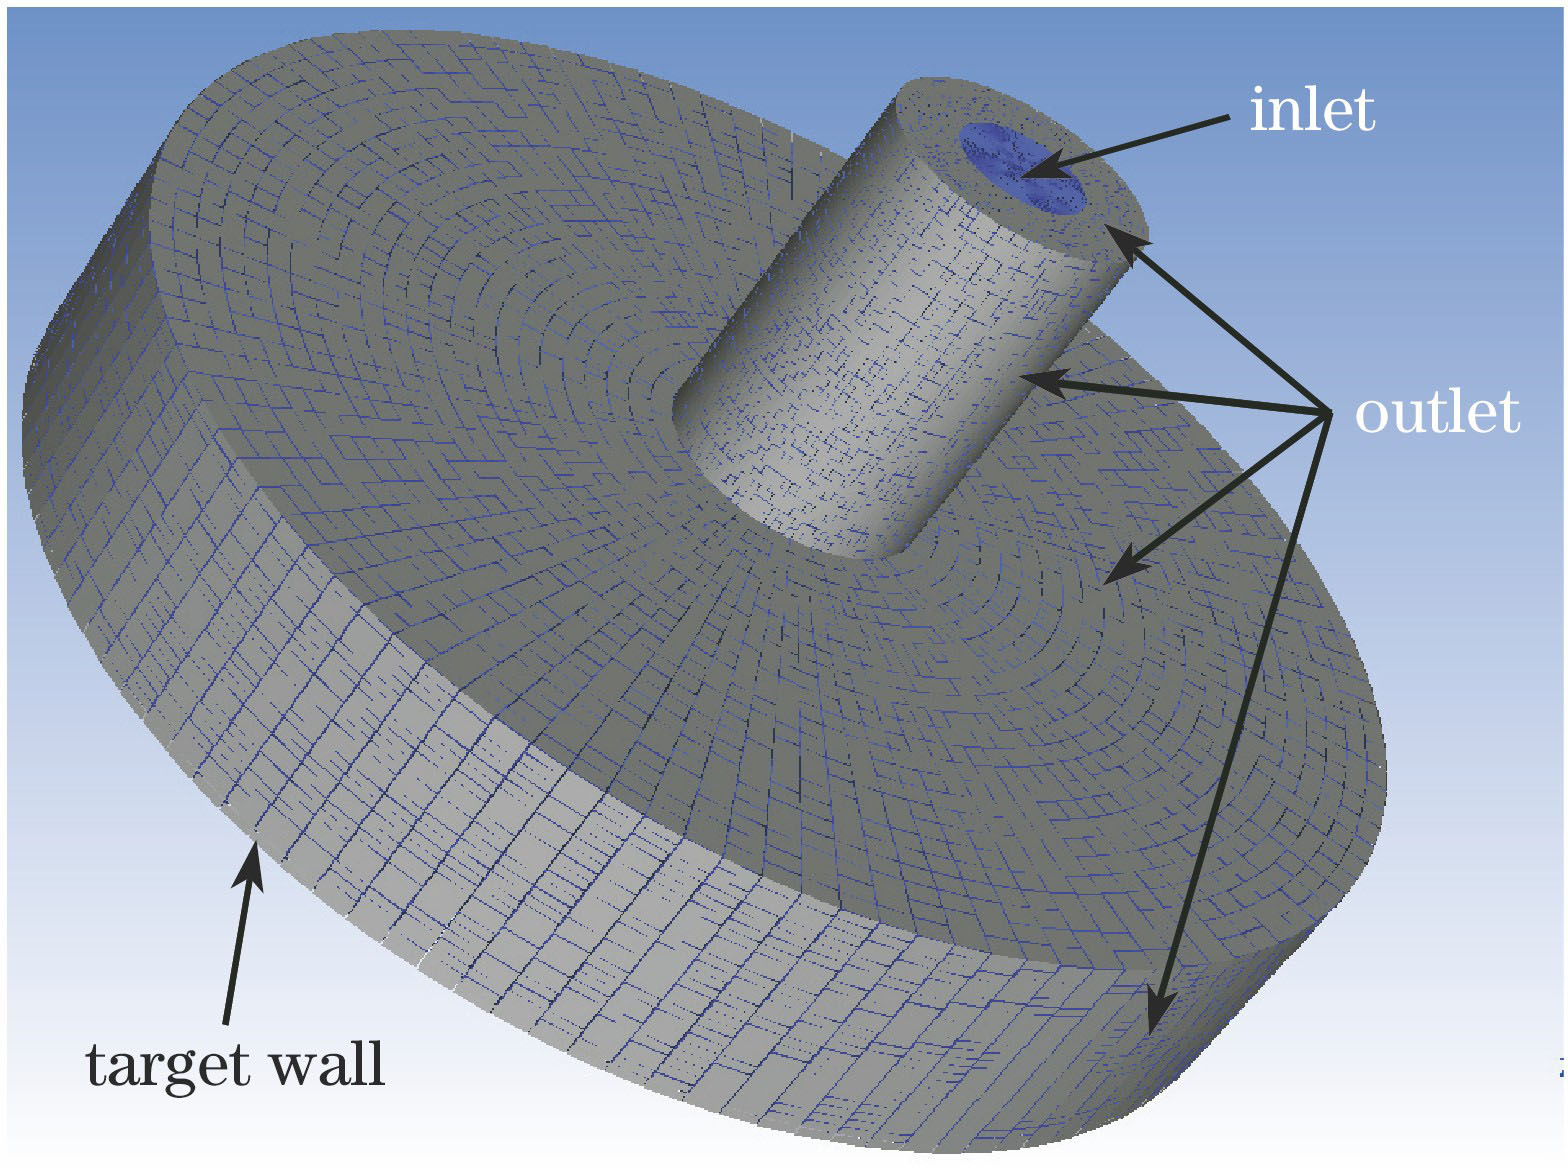 Mesh division and surface boundary of simulation model